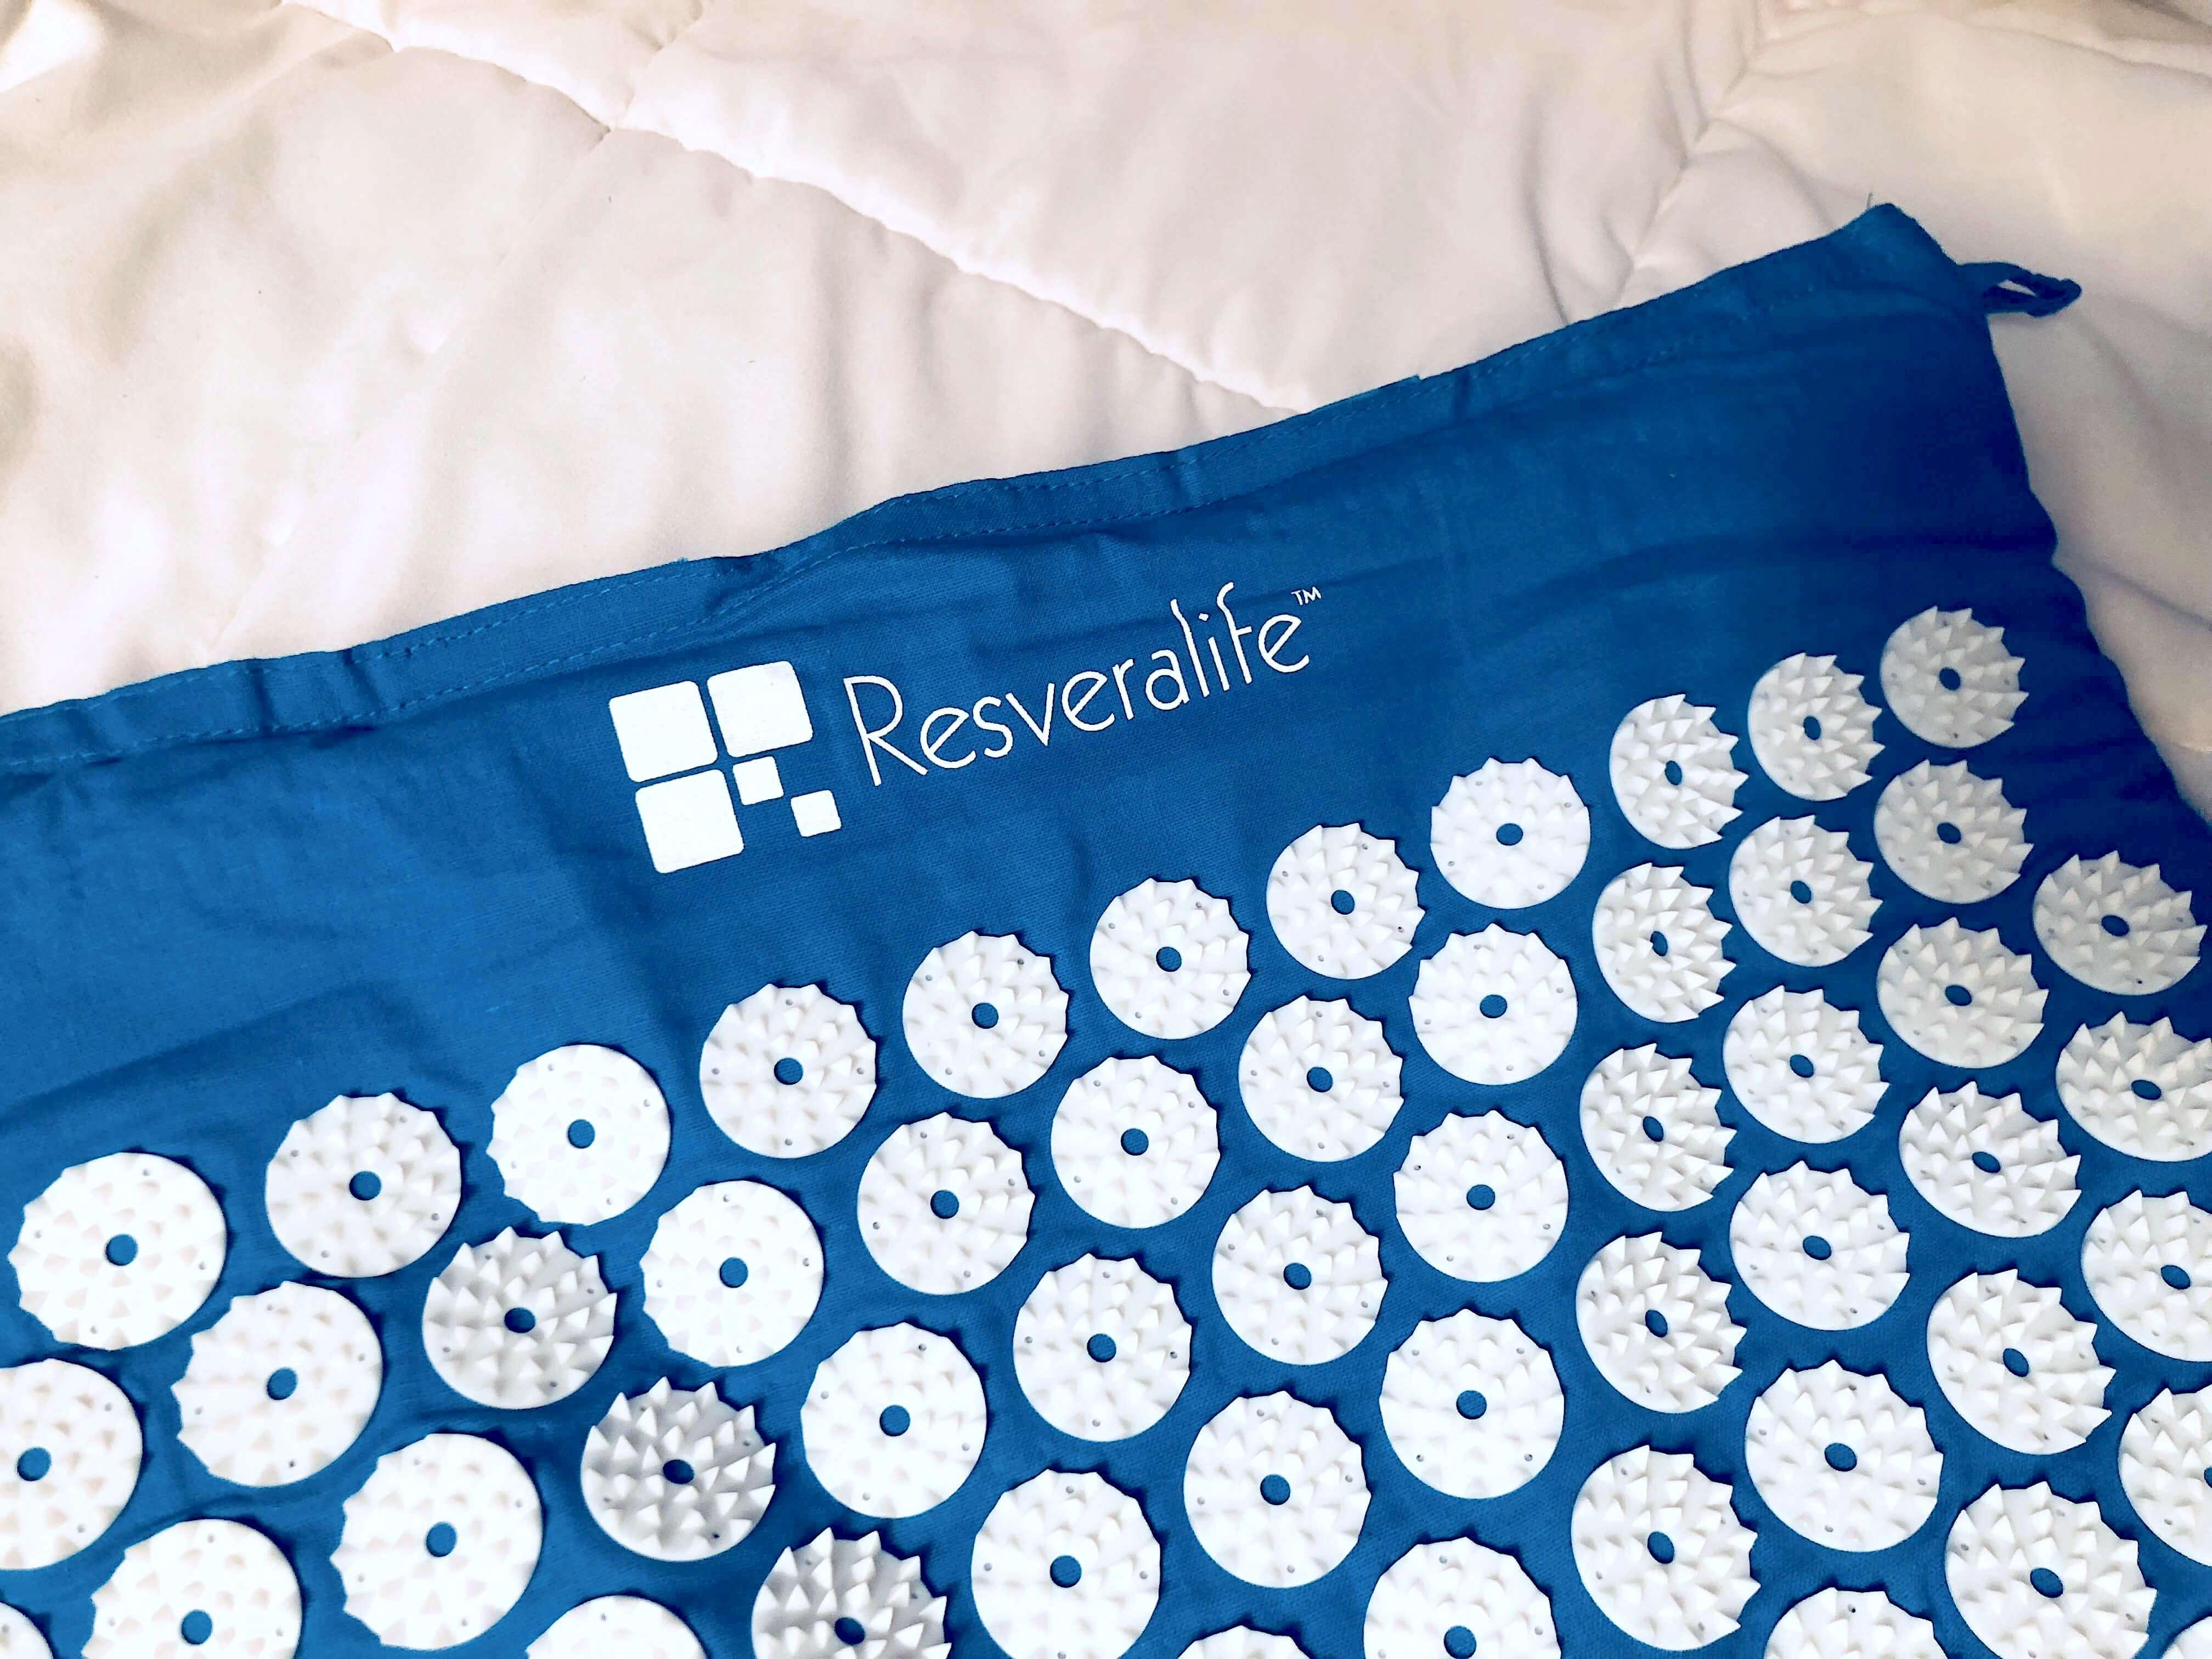 Resveralife Acupuncture Mat product review